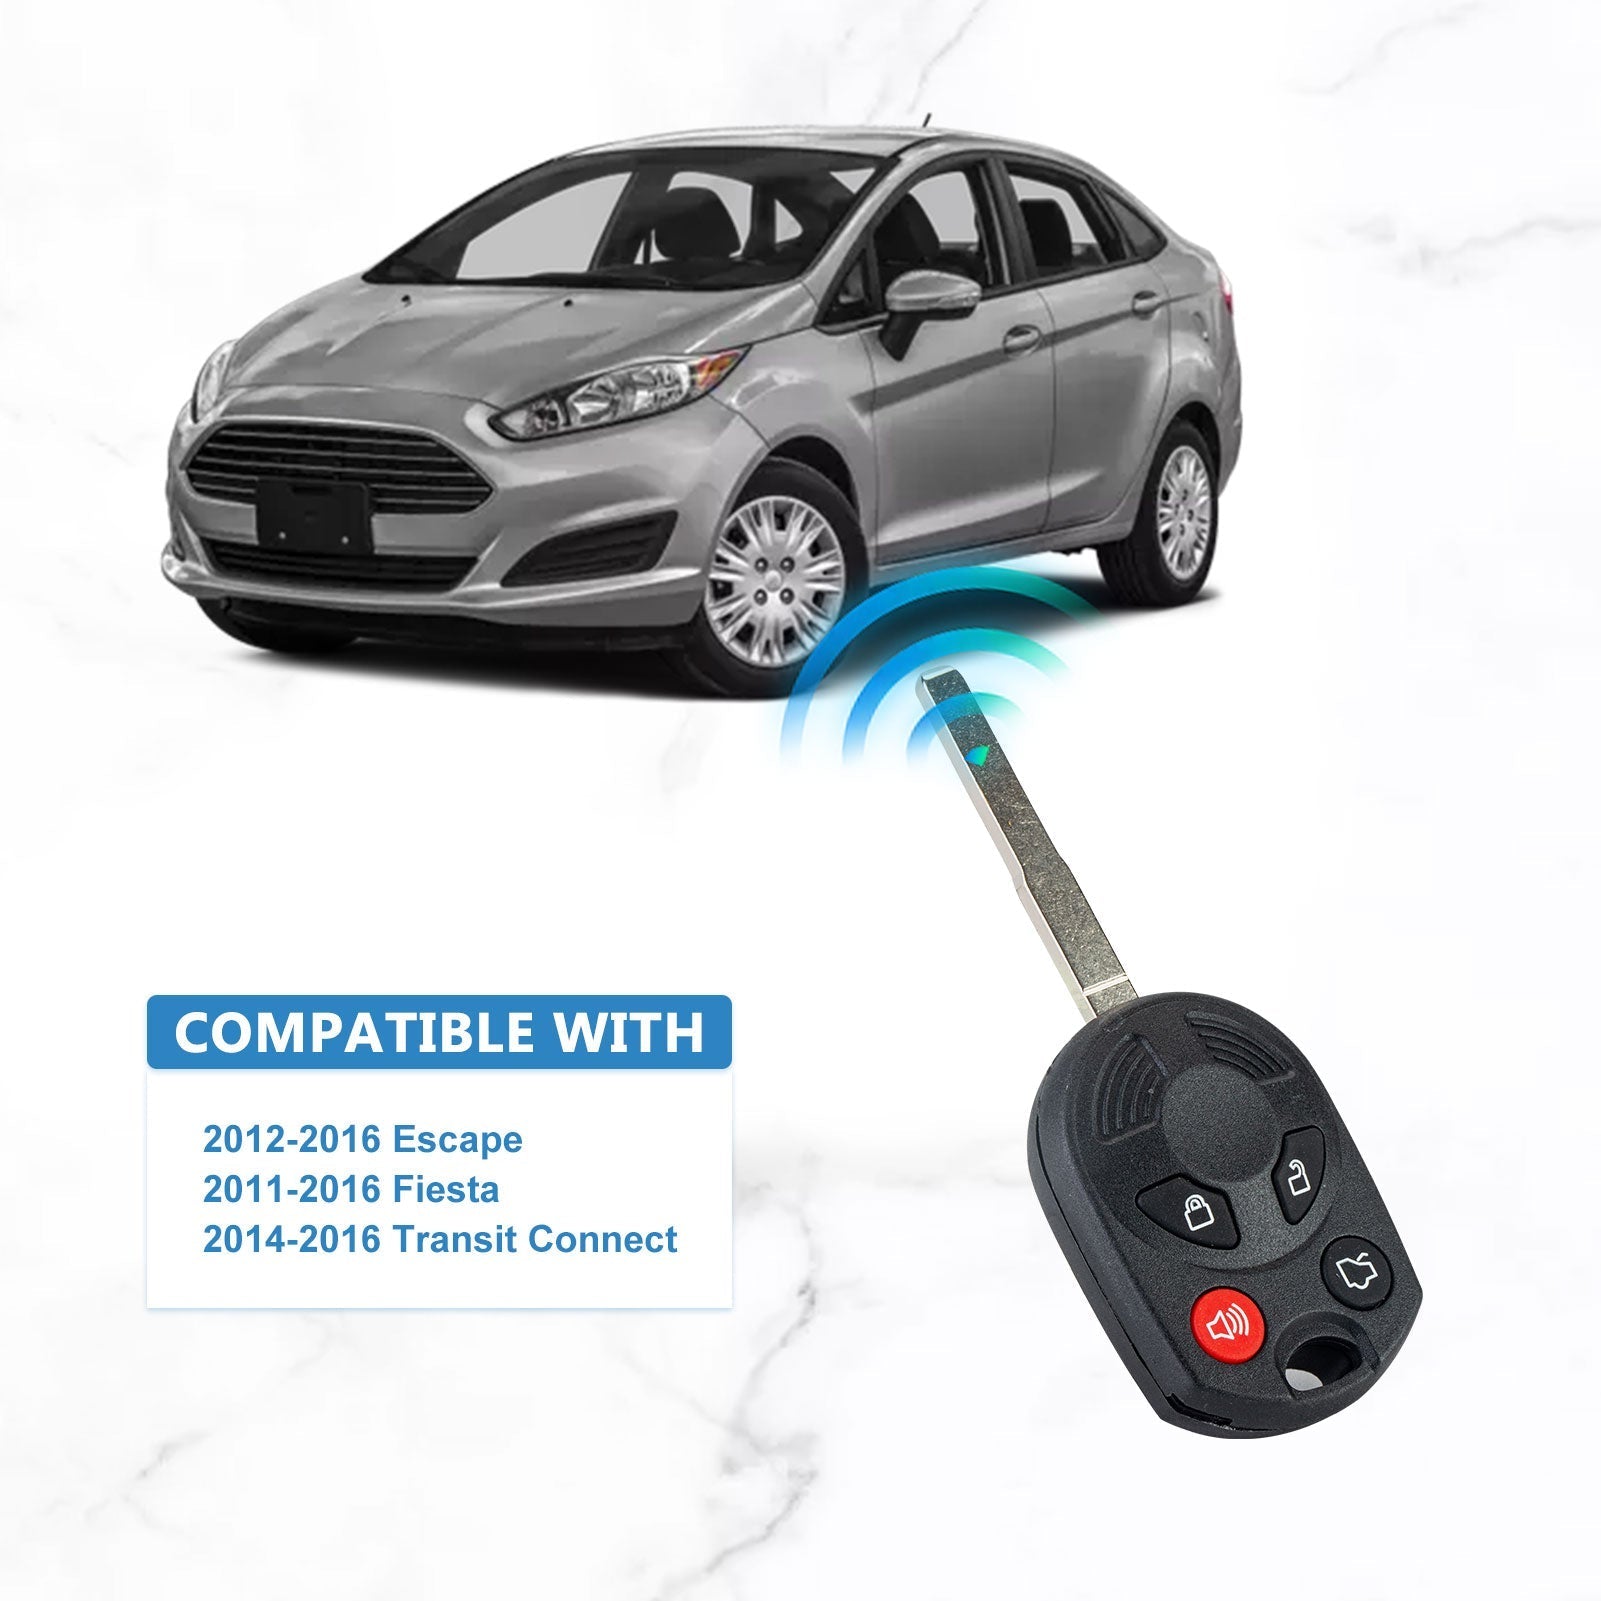 High Security Car Key 80 Bit Chip Replacement for 2012-2016 Escape/2011-2016 Fiesta OUCD6000022, 164-R8007 315MHZ  KR-F4SC-10